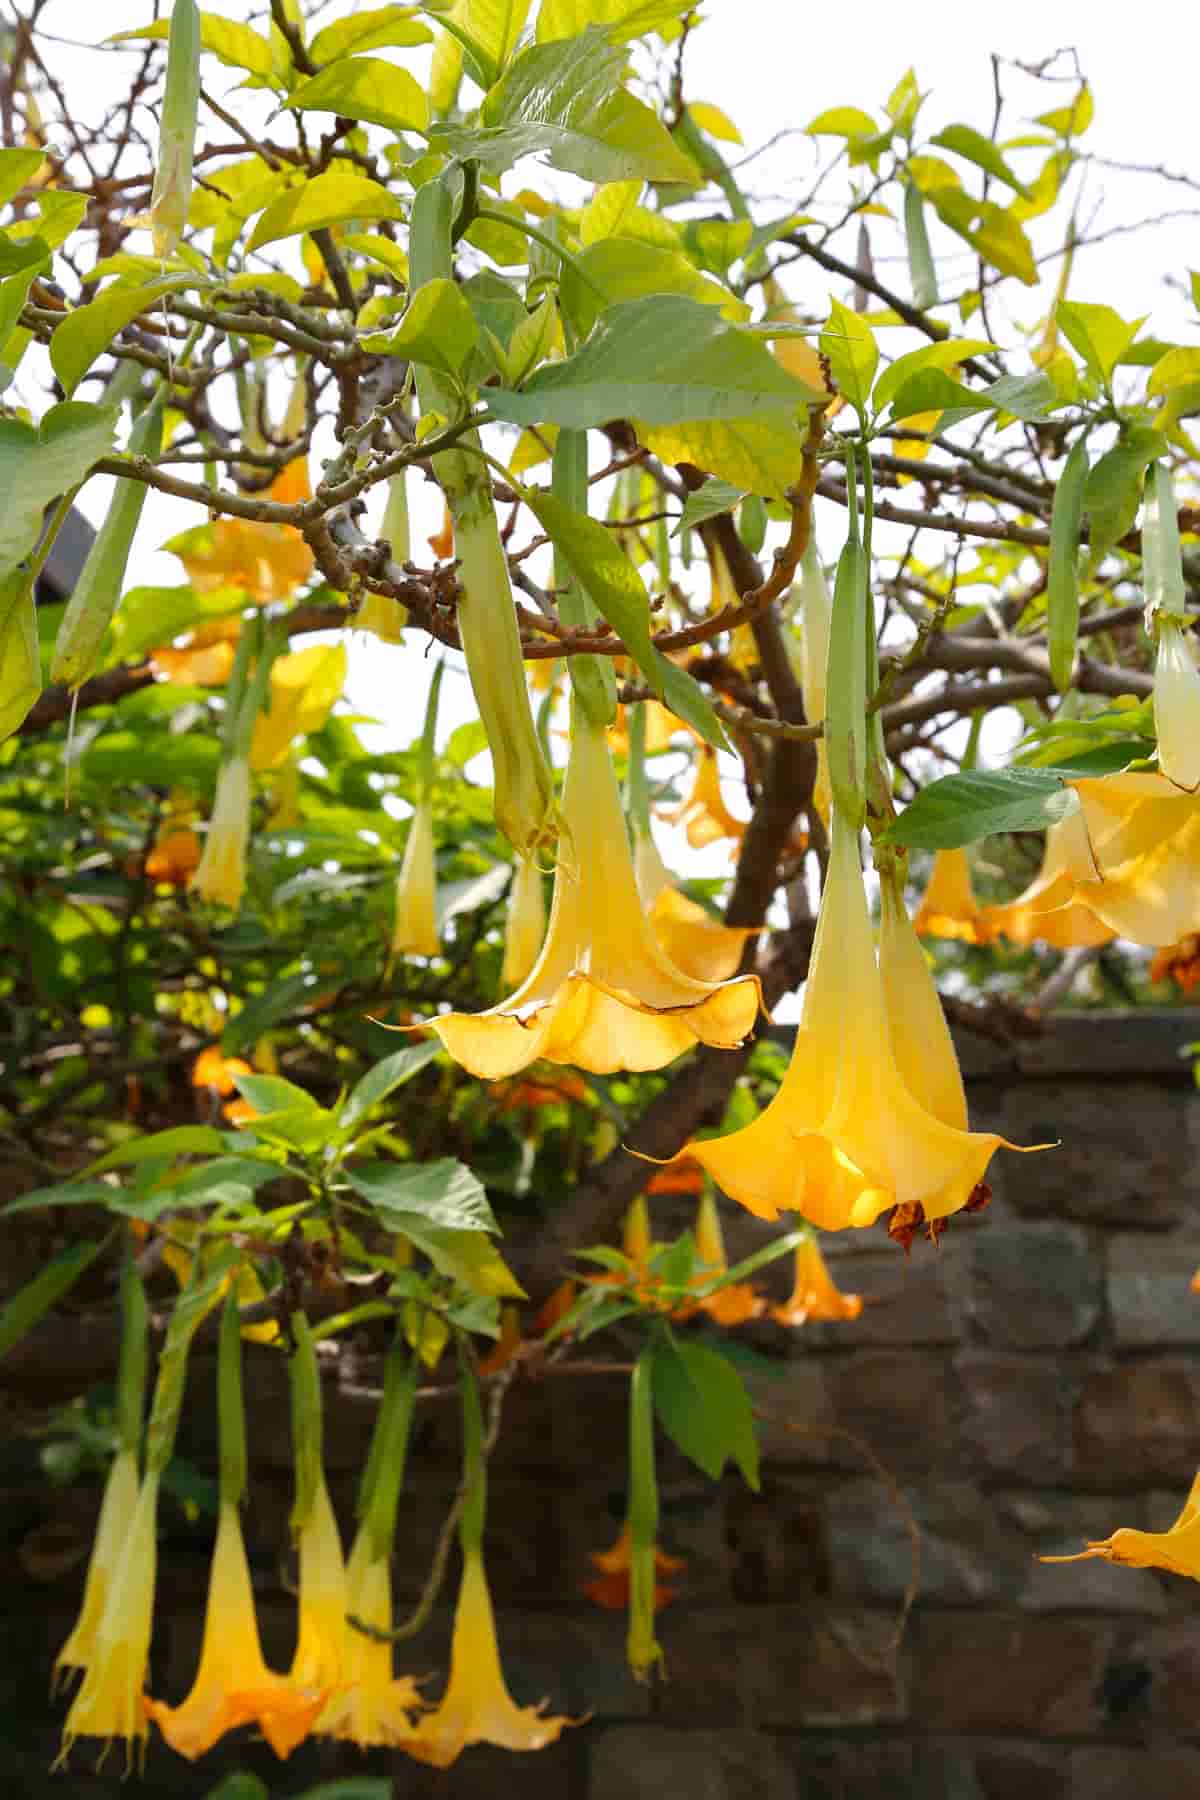 10 Reasons Why Your Angel Trumpet is Not Blooming
